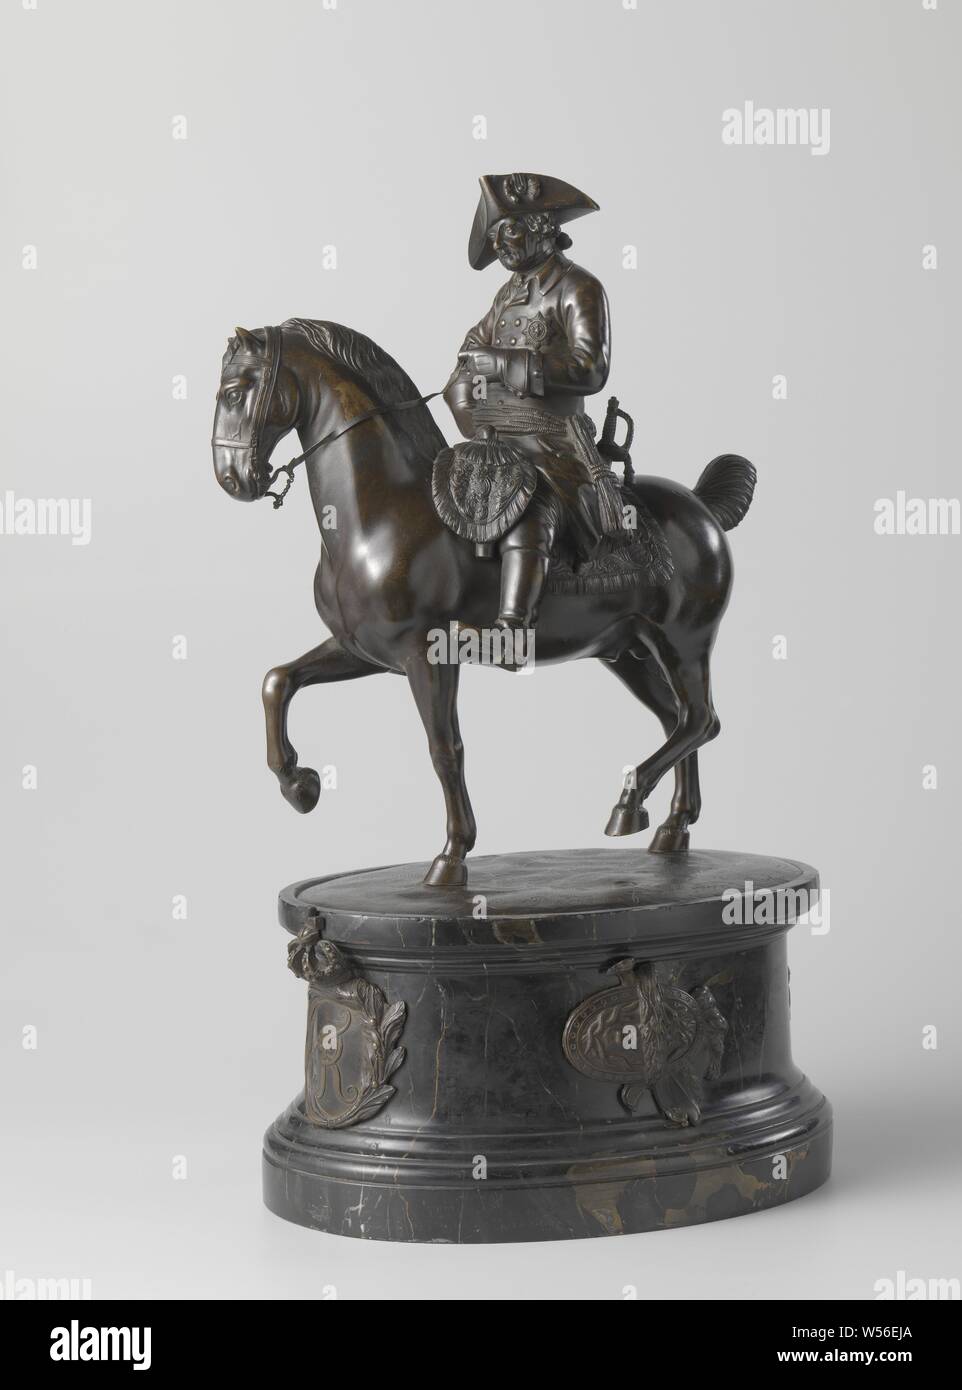 Statuette of Frederick the Great, King of Prussia Statue of Frederick the Great, King of Prussia, The king (1712-1786) sits on a step-by-step horse that has lifted the right foreleg and the left hind leg for a moment ground light, the head is turned slightly to the right. He holds the rein with one hand, while the other rests in the side. He wears a uniform consisting of a jacket with a jabot, gloves and boots, on the head a wig and, on the jacket, place the Order of the Black Eagle, a sash around the waist, a sword and a sword on the left. The saddle, with rider pistols on both sides in Stock Photo